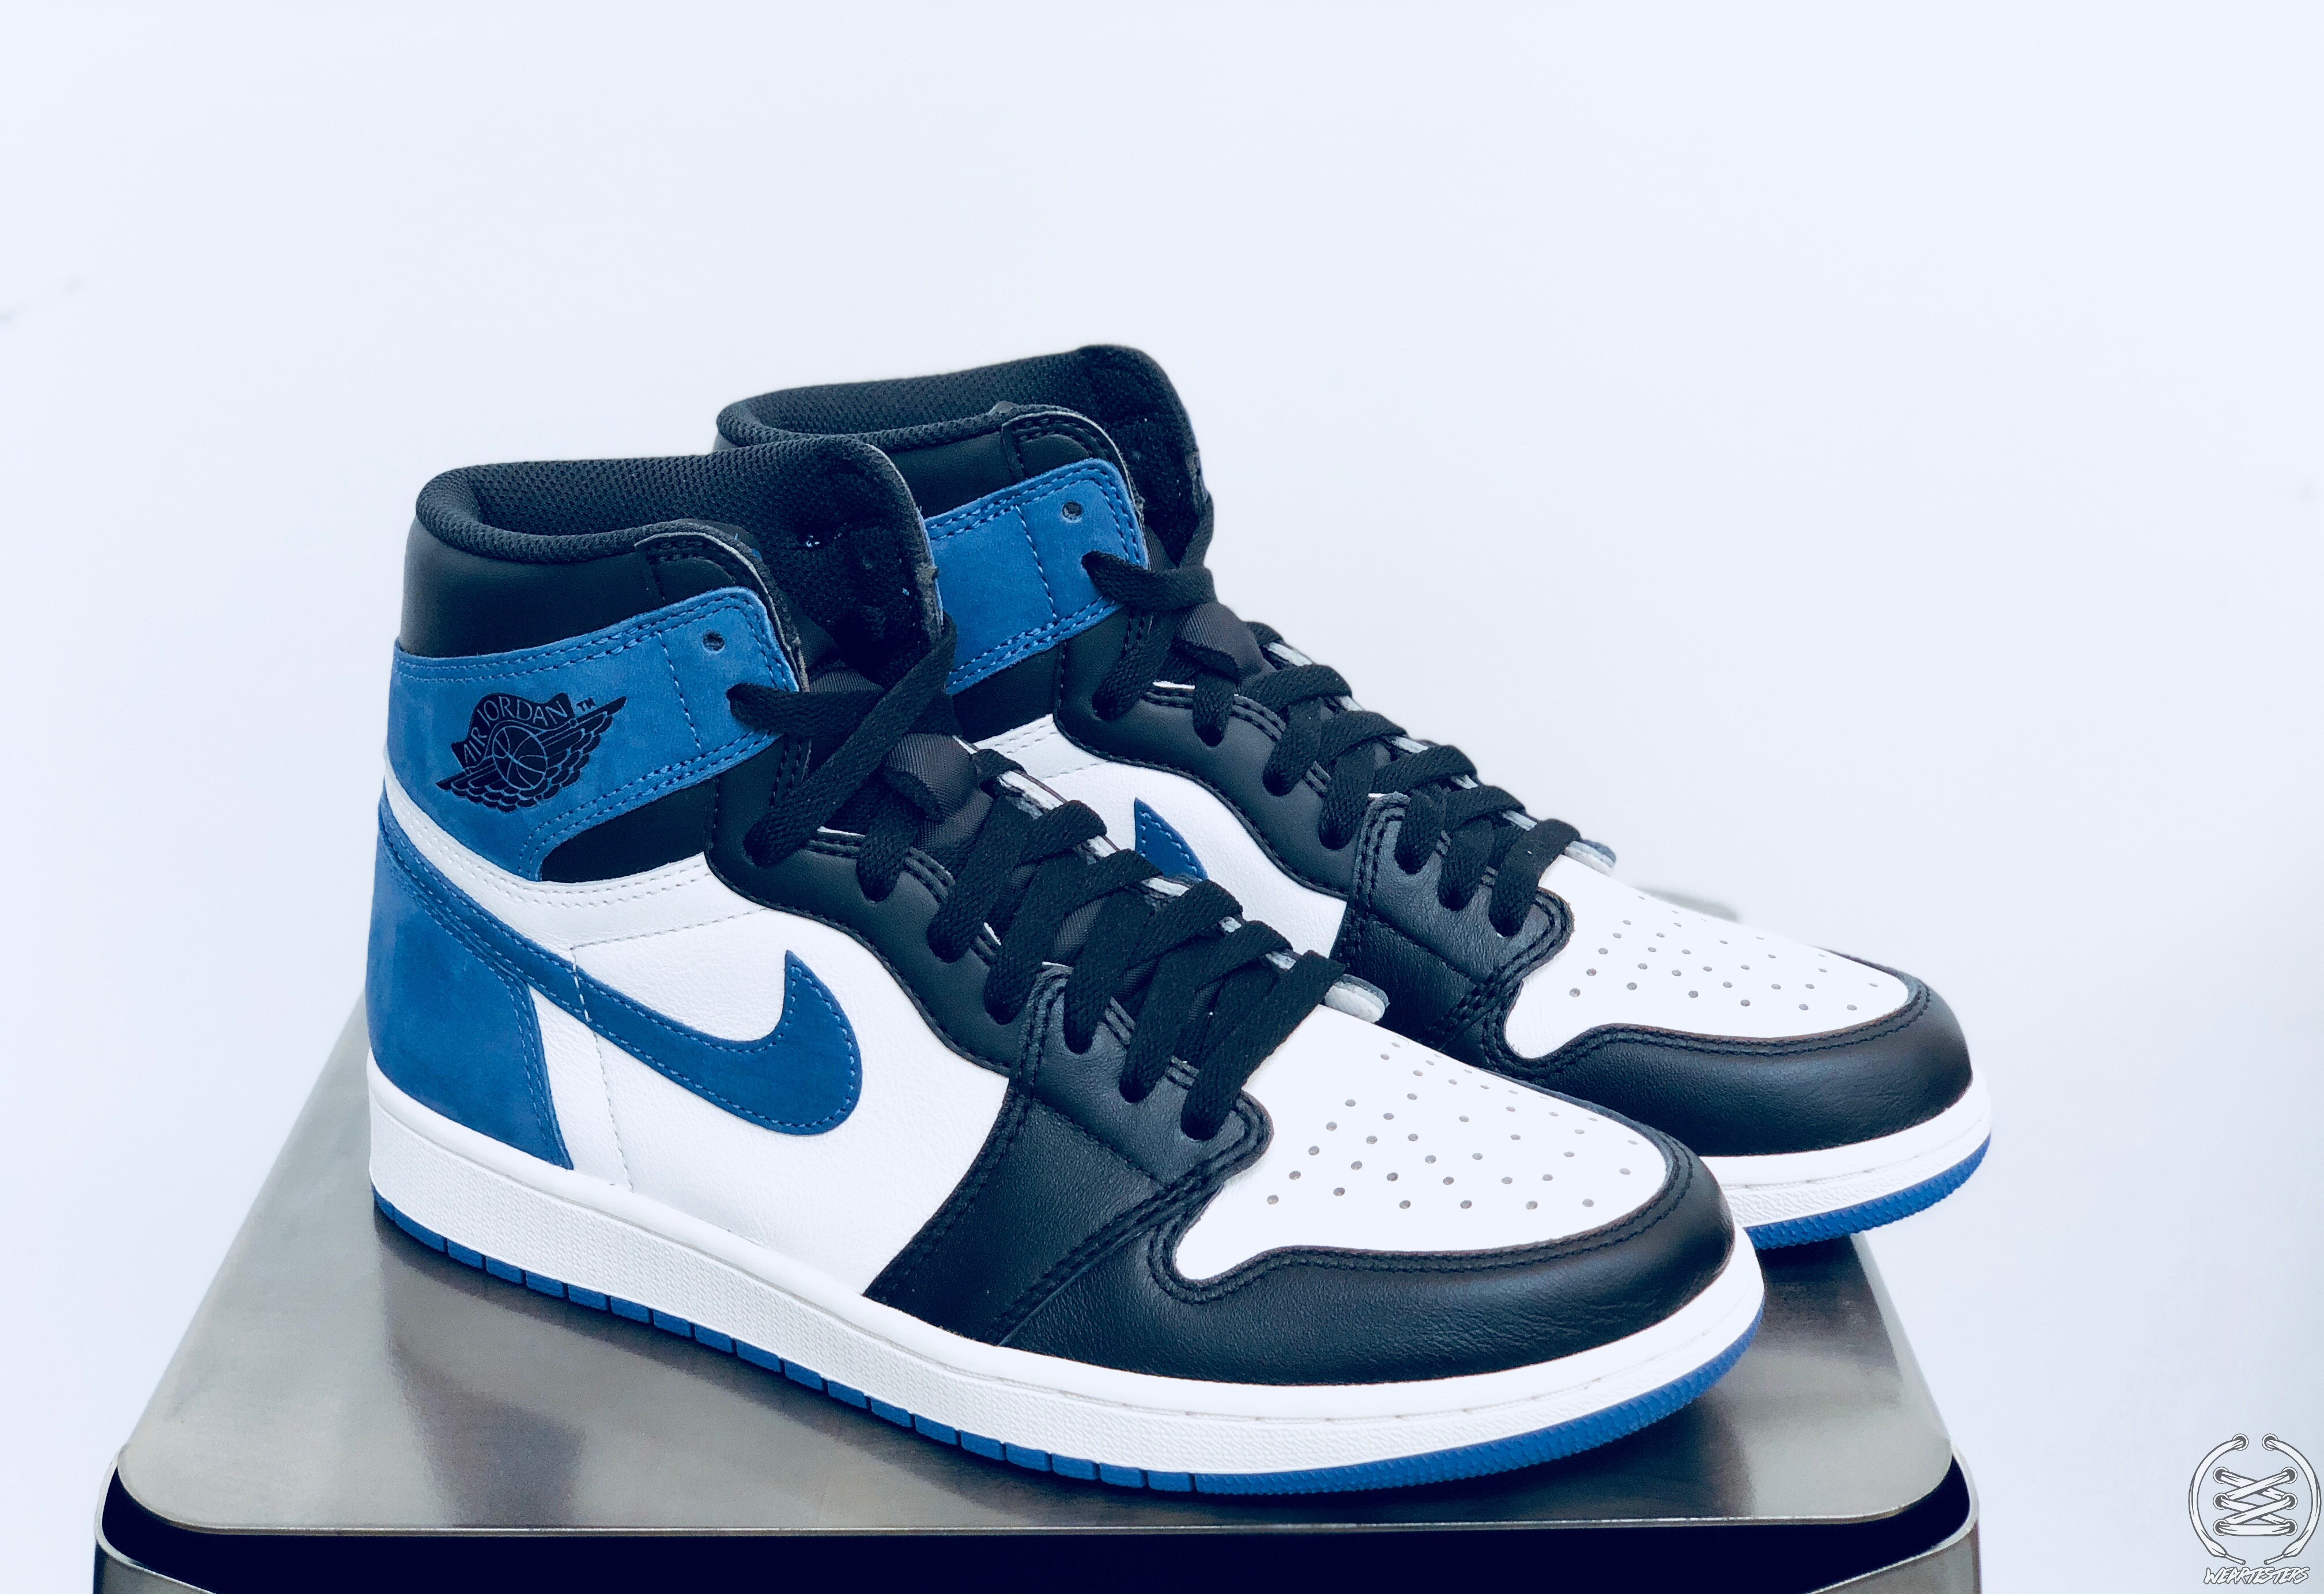 Air Jordan 1 Blue Moon Best Hand in the Game collection 1